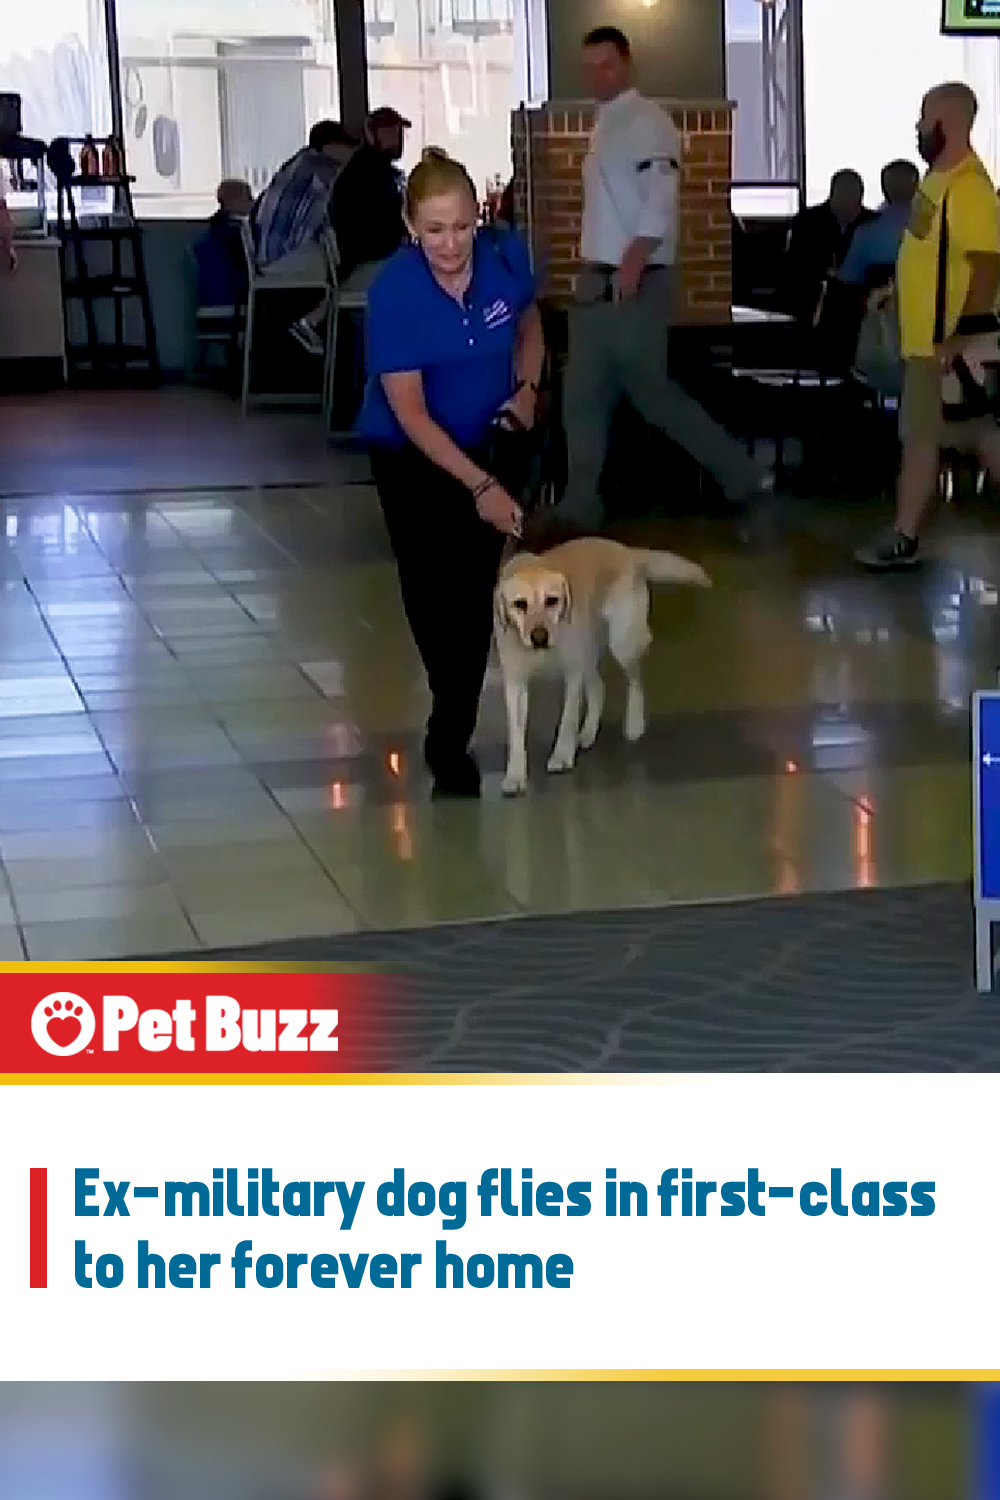 Ex-military dog flies in first-class to her forever home